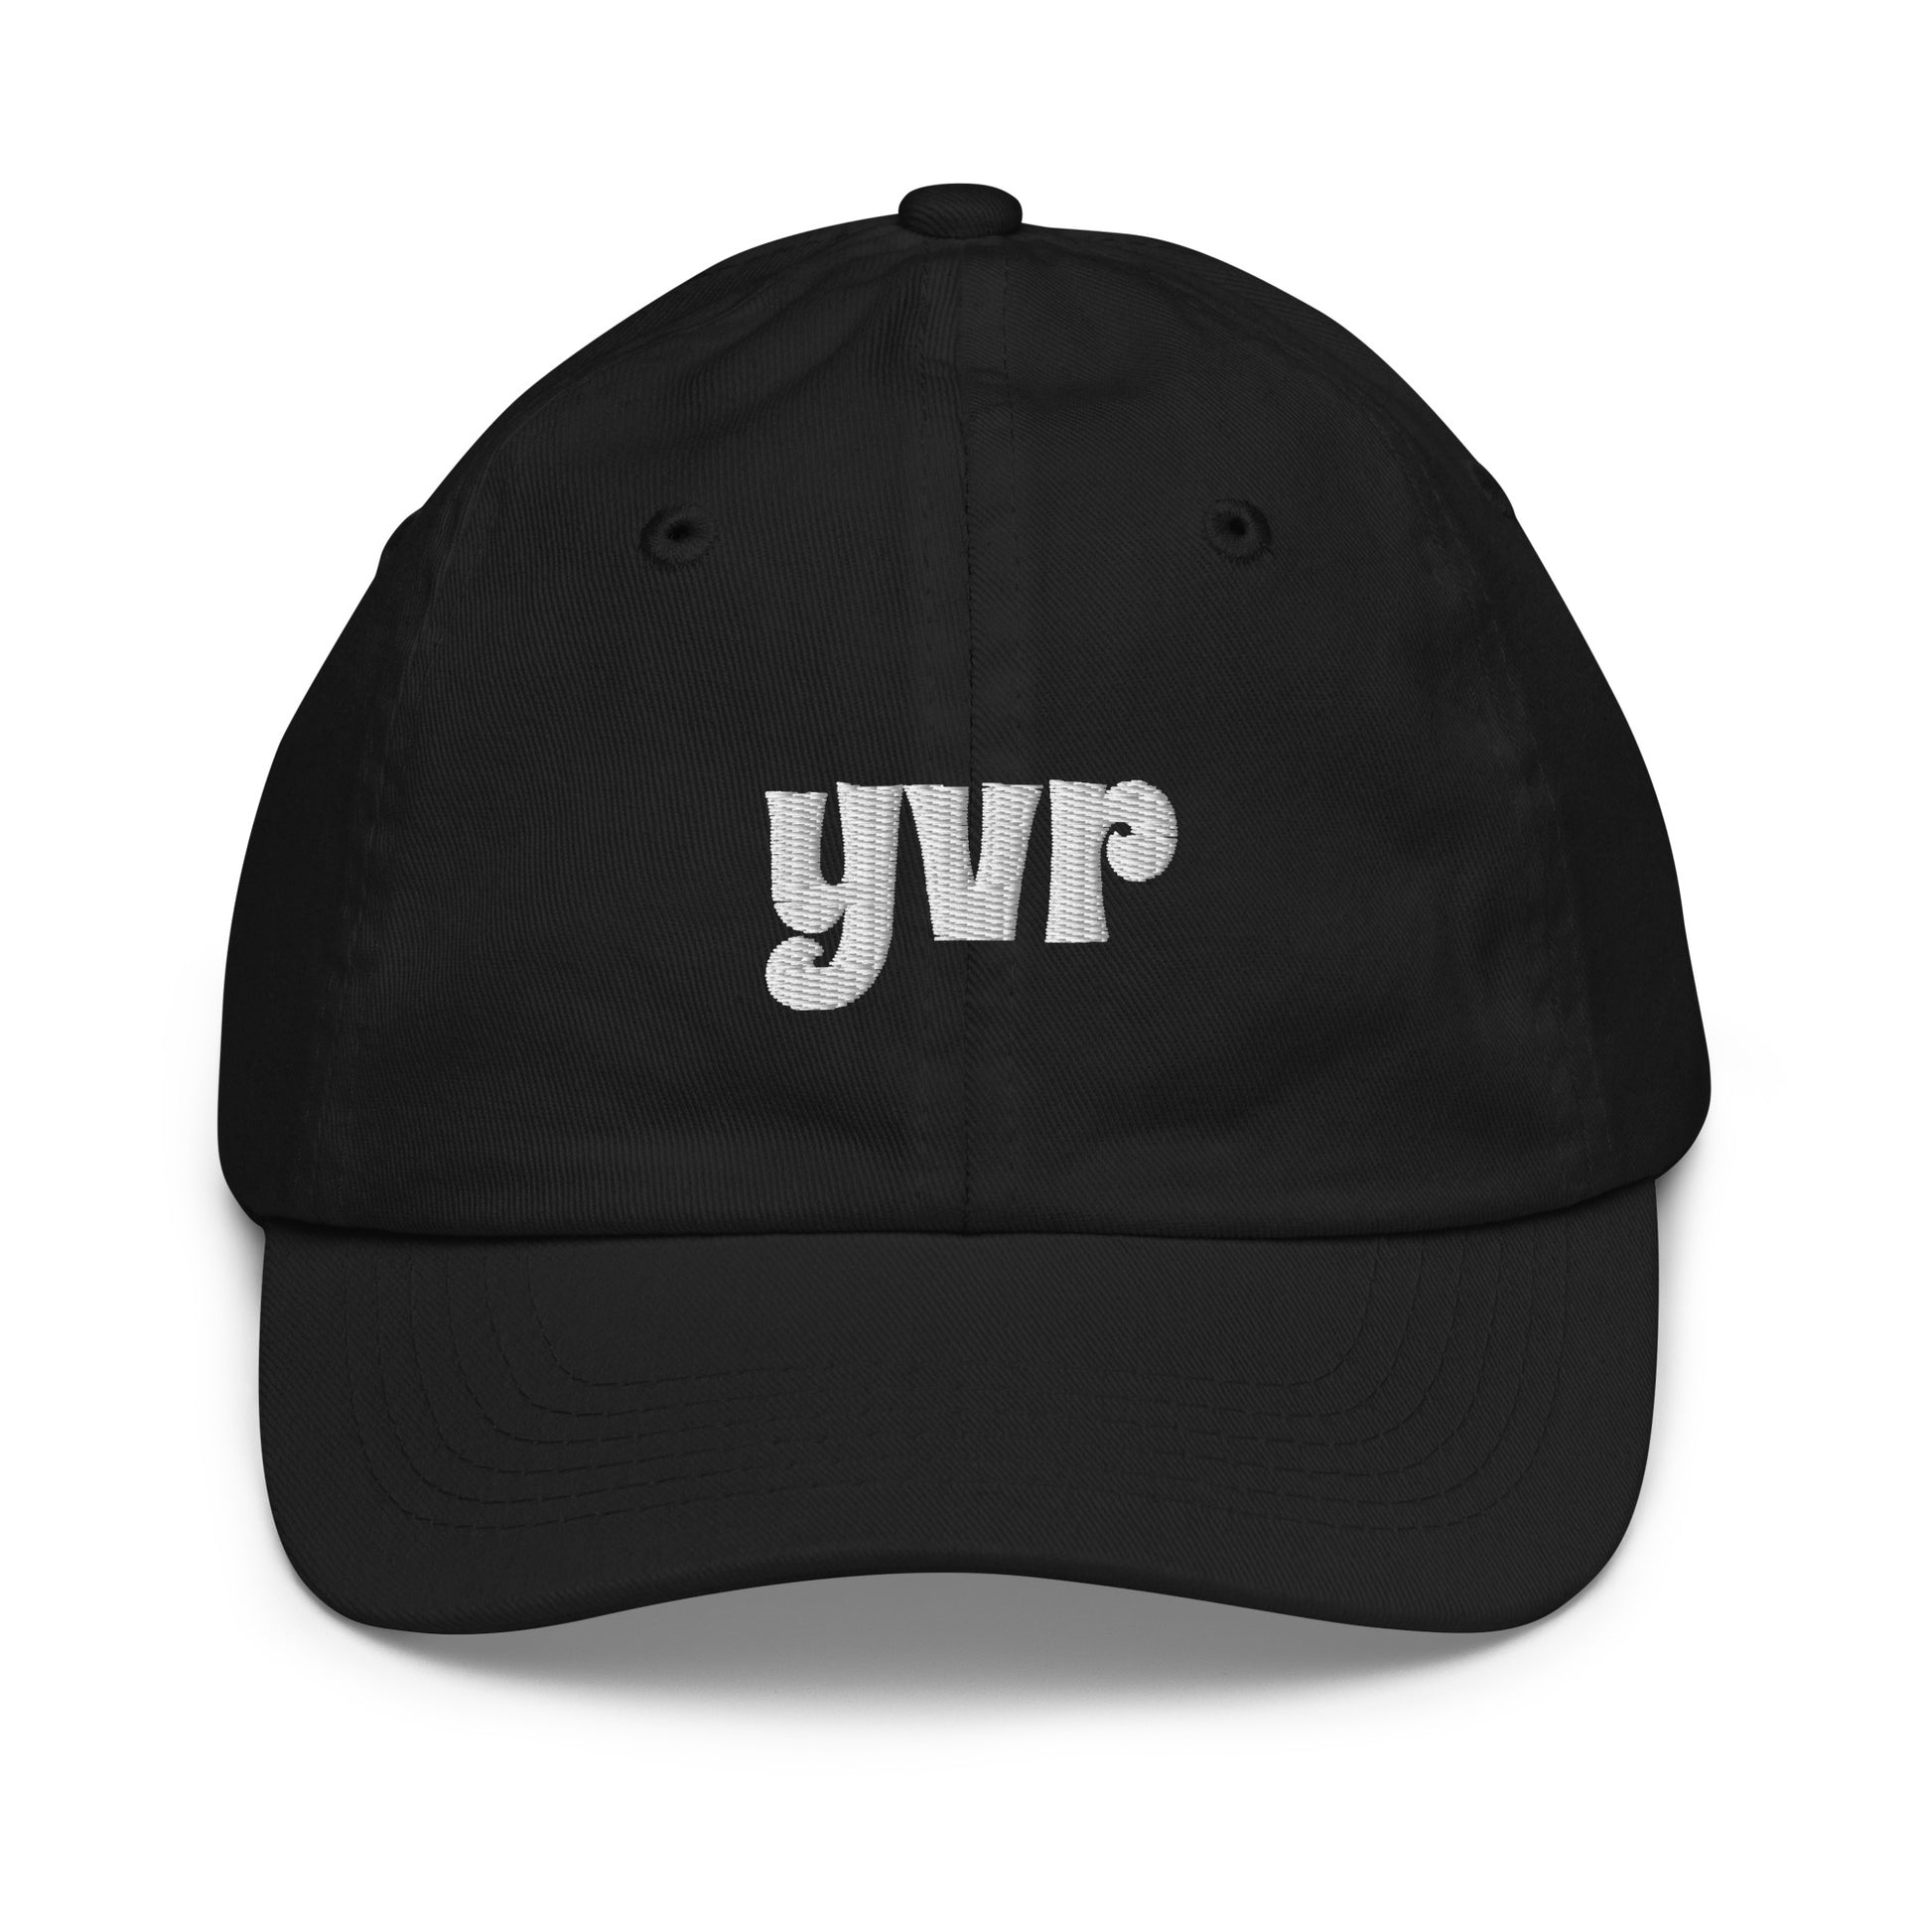 Groovy Kid's Baseball Cap - White • YVR Vancouver • YHM Designs - Image 10